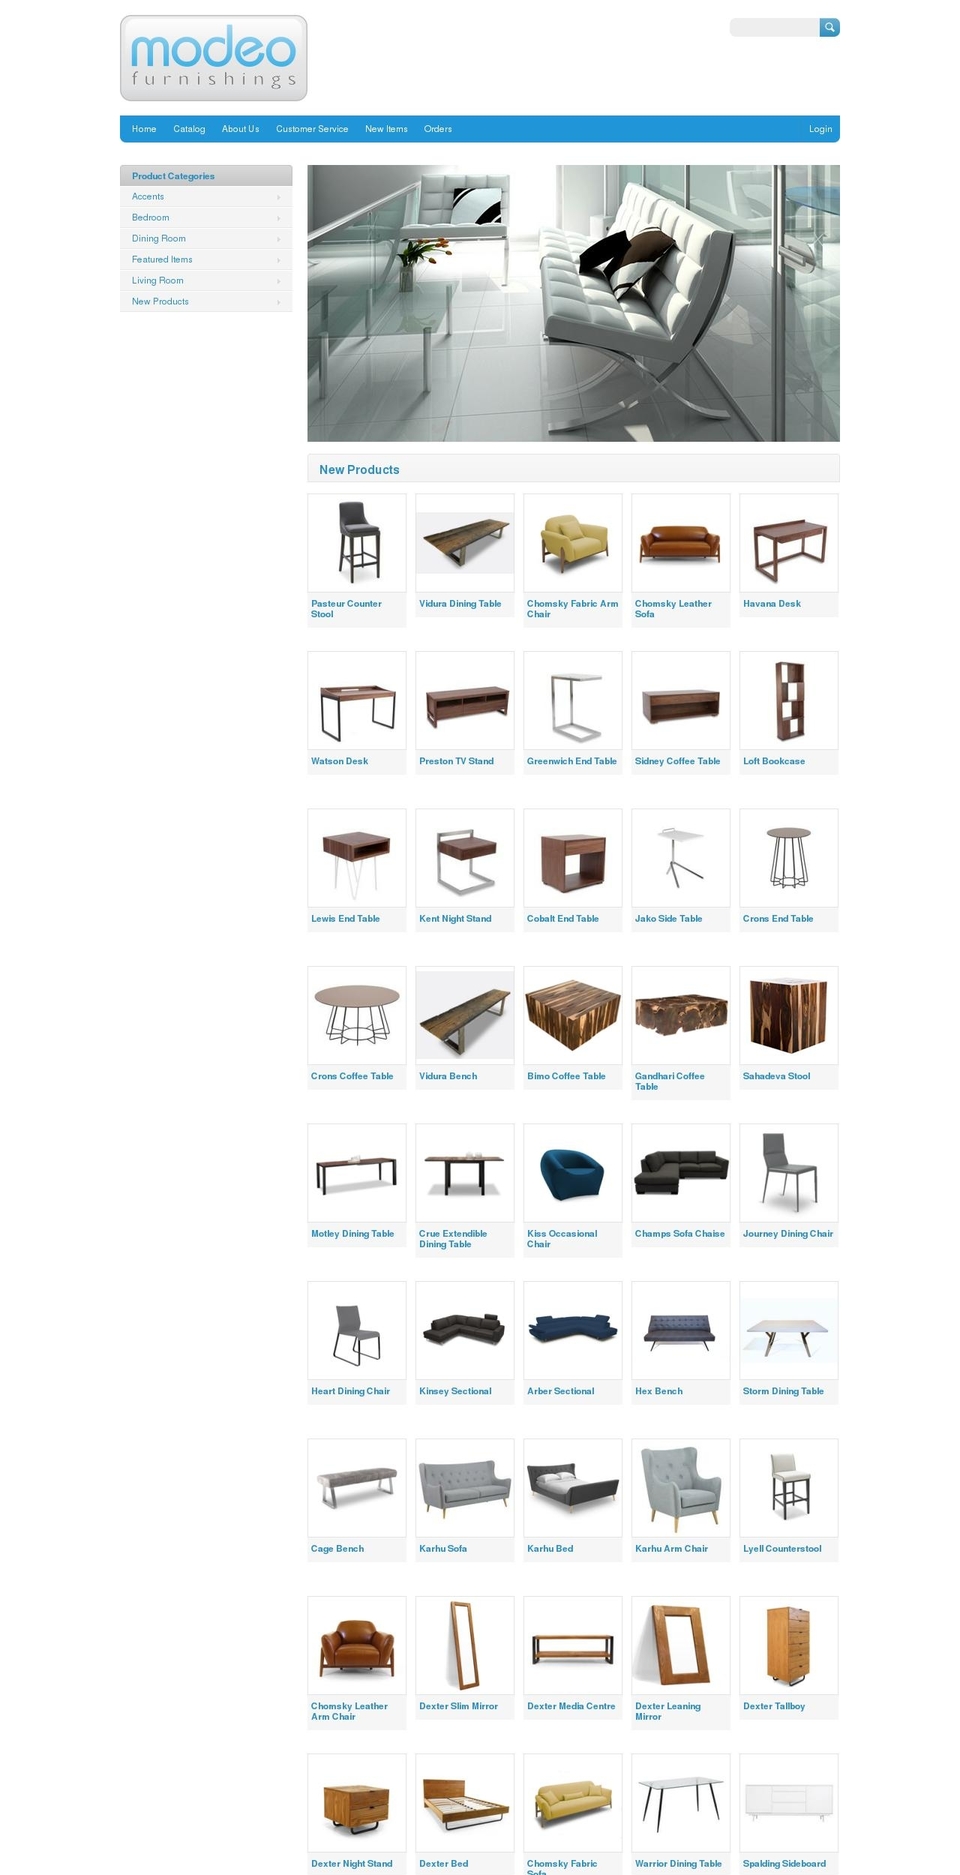 Mode Shopify theme site example modeofurnishings.org